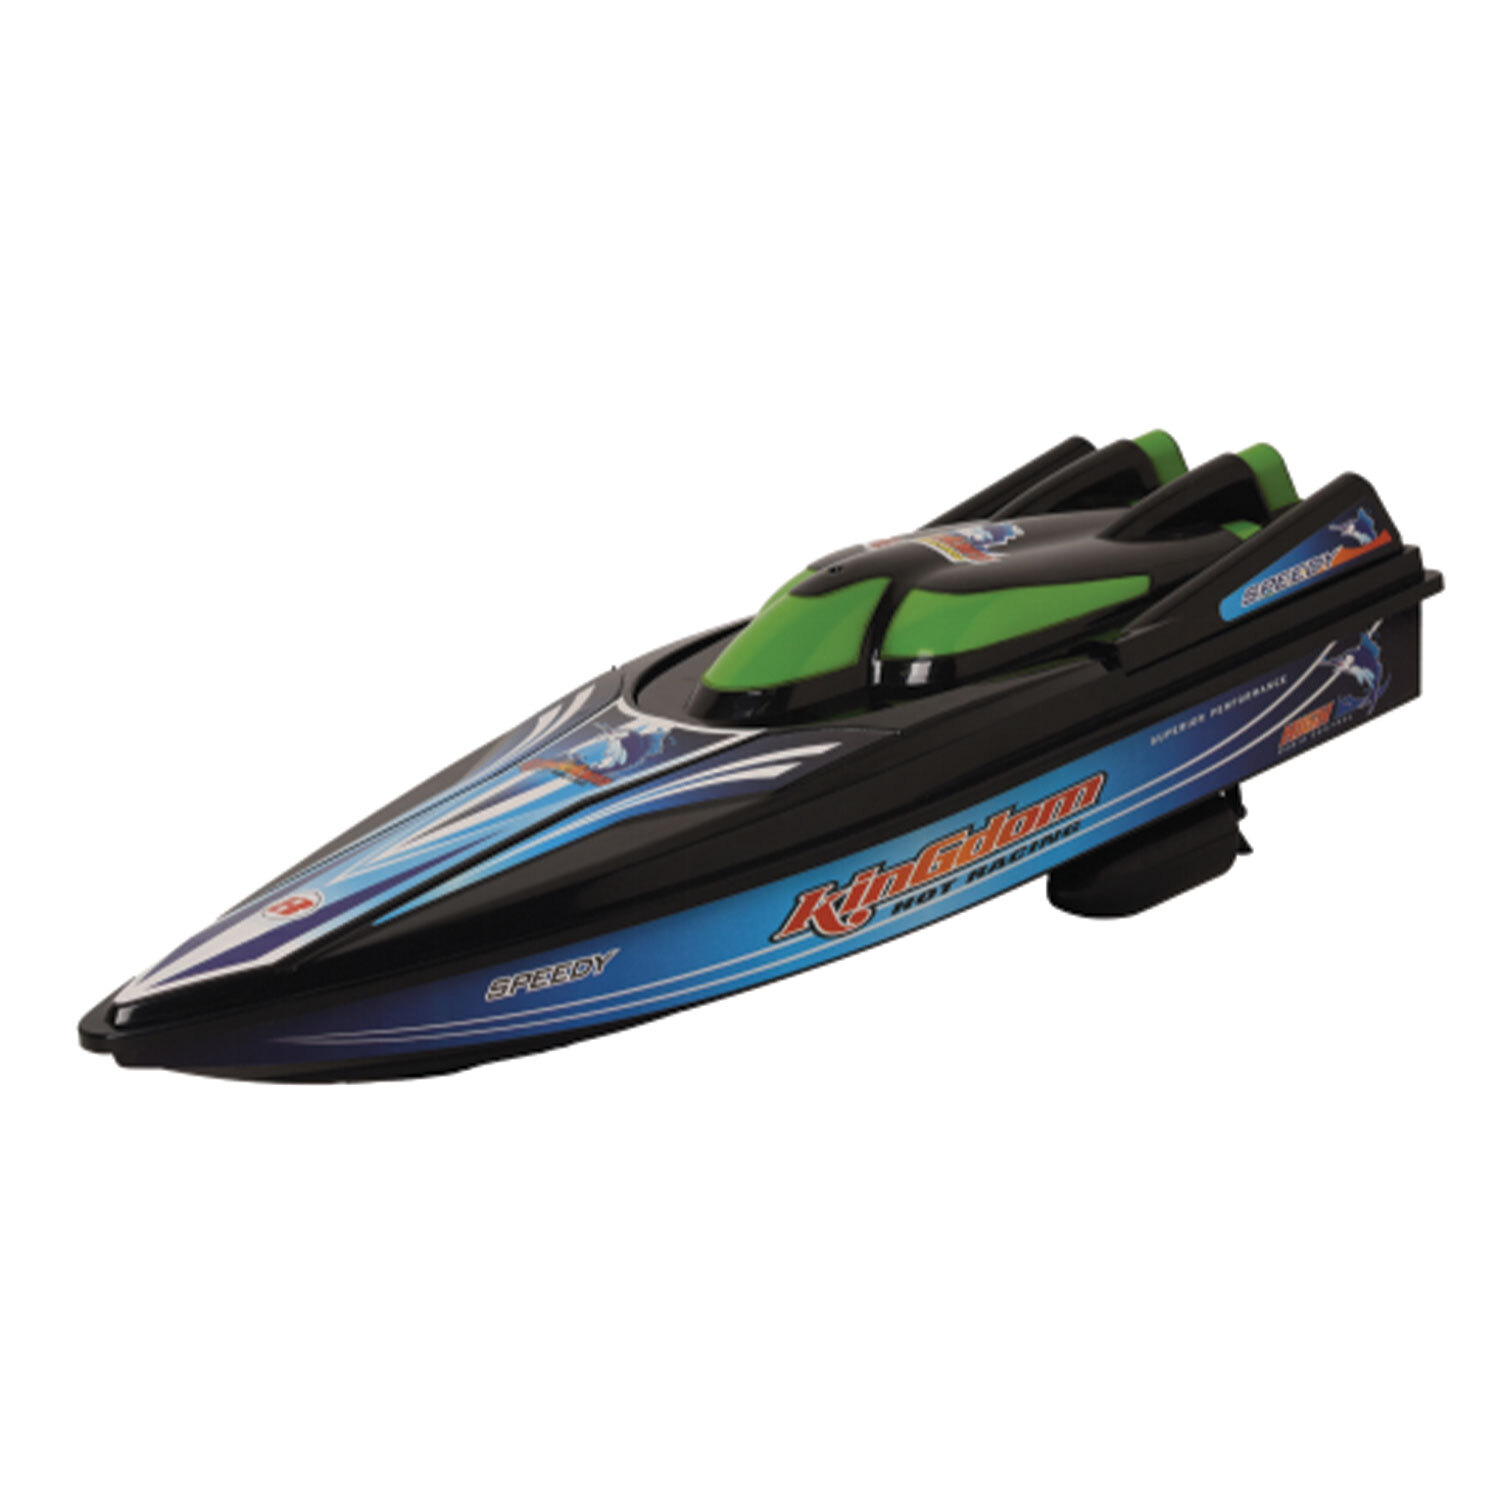 Kingdom 2.4G Remote Control High Speed Racing Boat Image